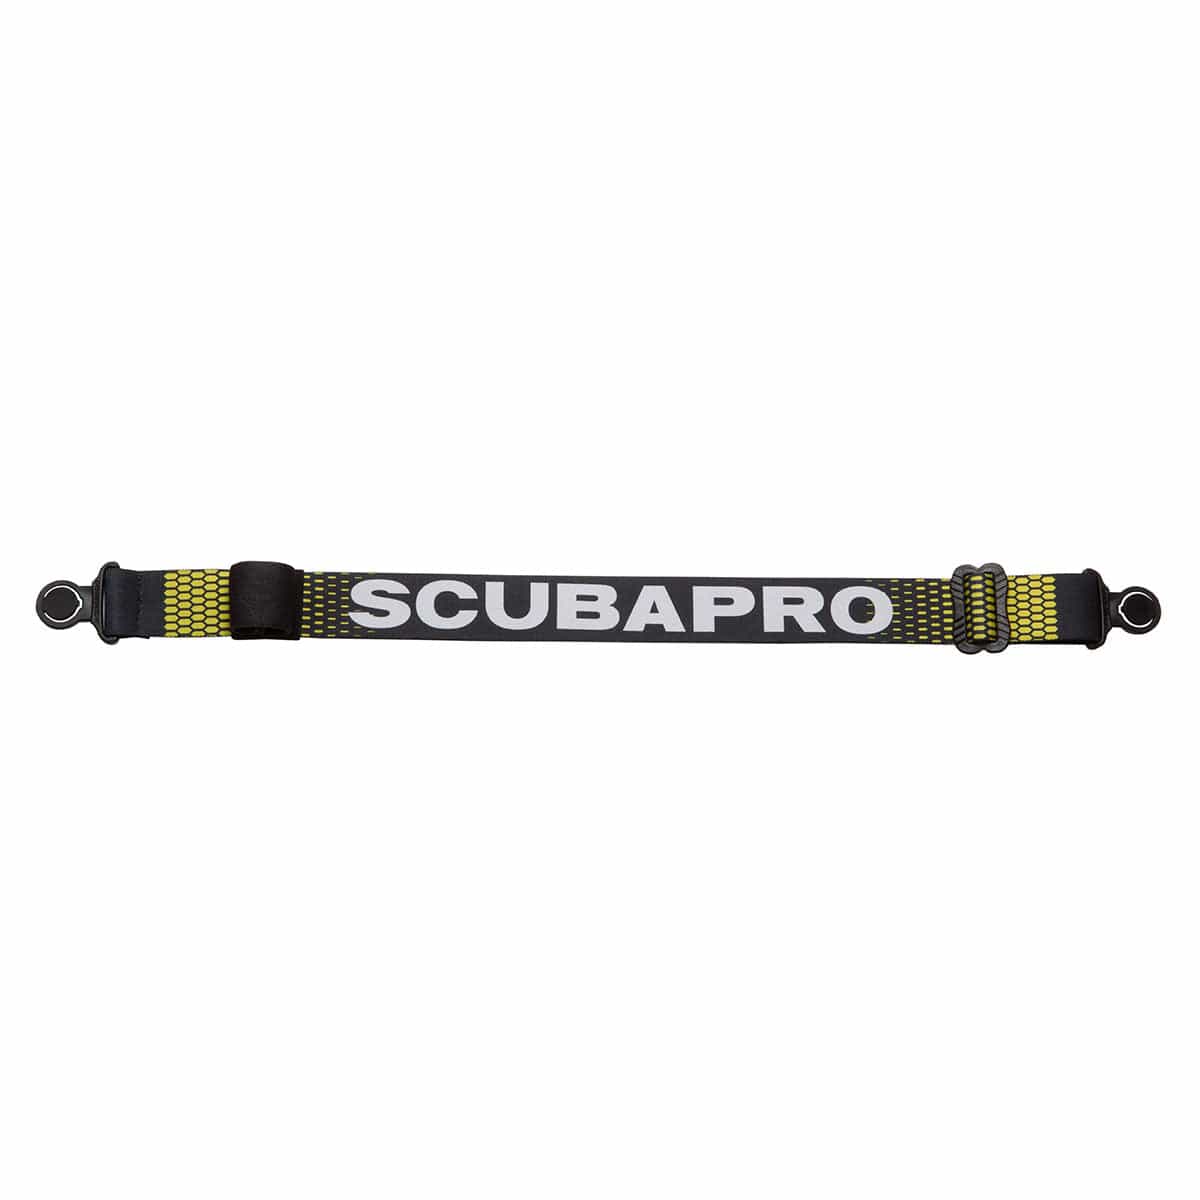 Scubapro Comfort Strap - Turquoise - 24.730.020-NED - 25